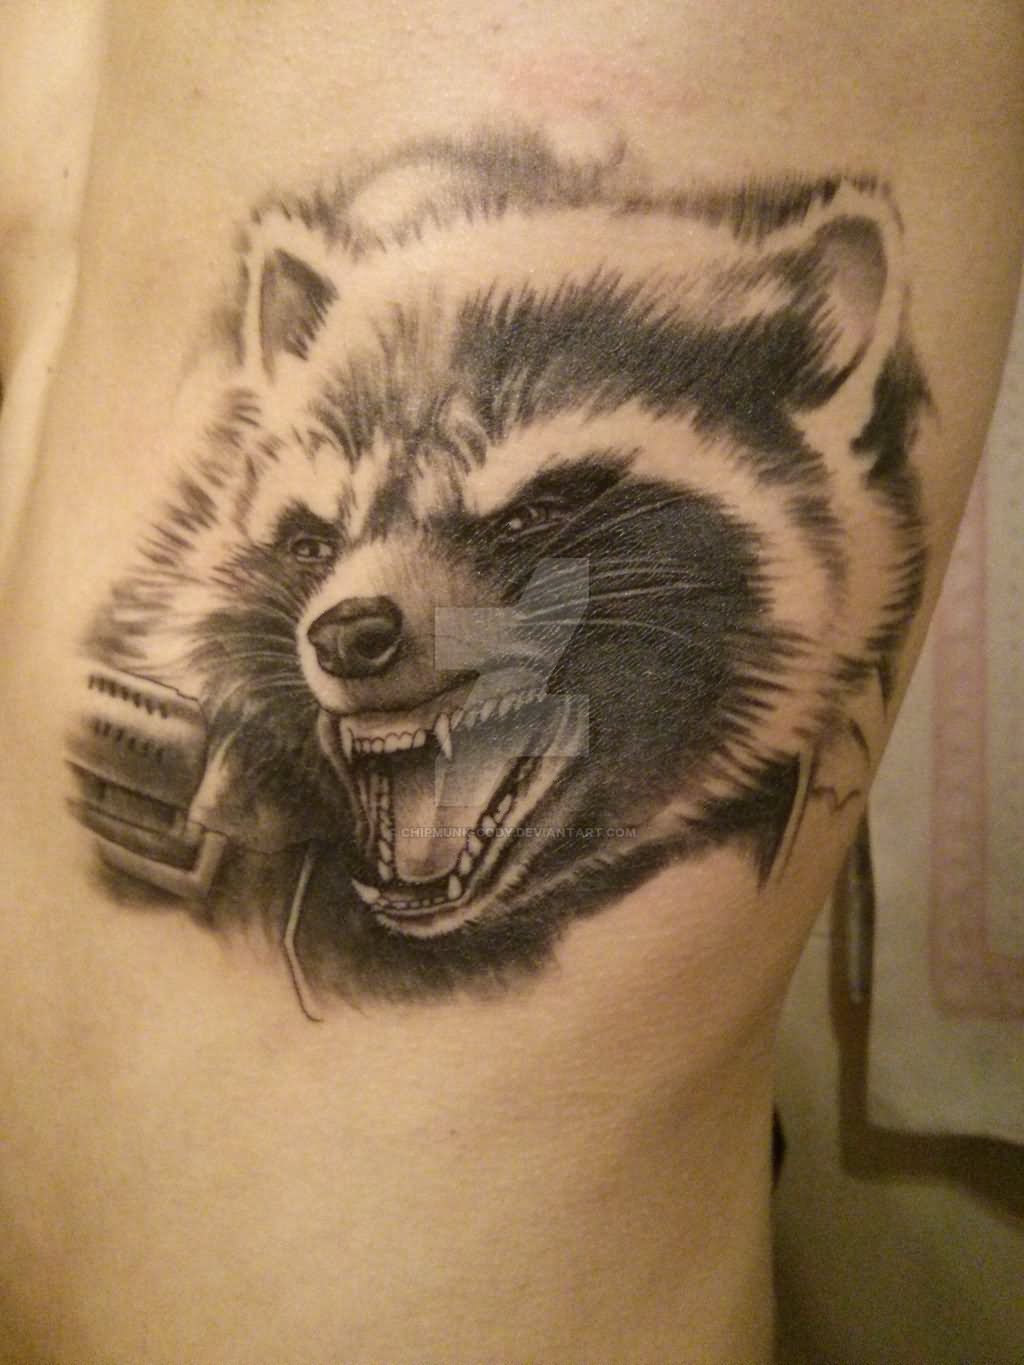 Angry Raccoon Tattoo by Chipmunk Cody